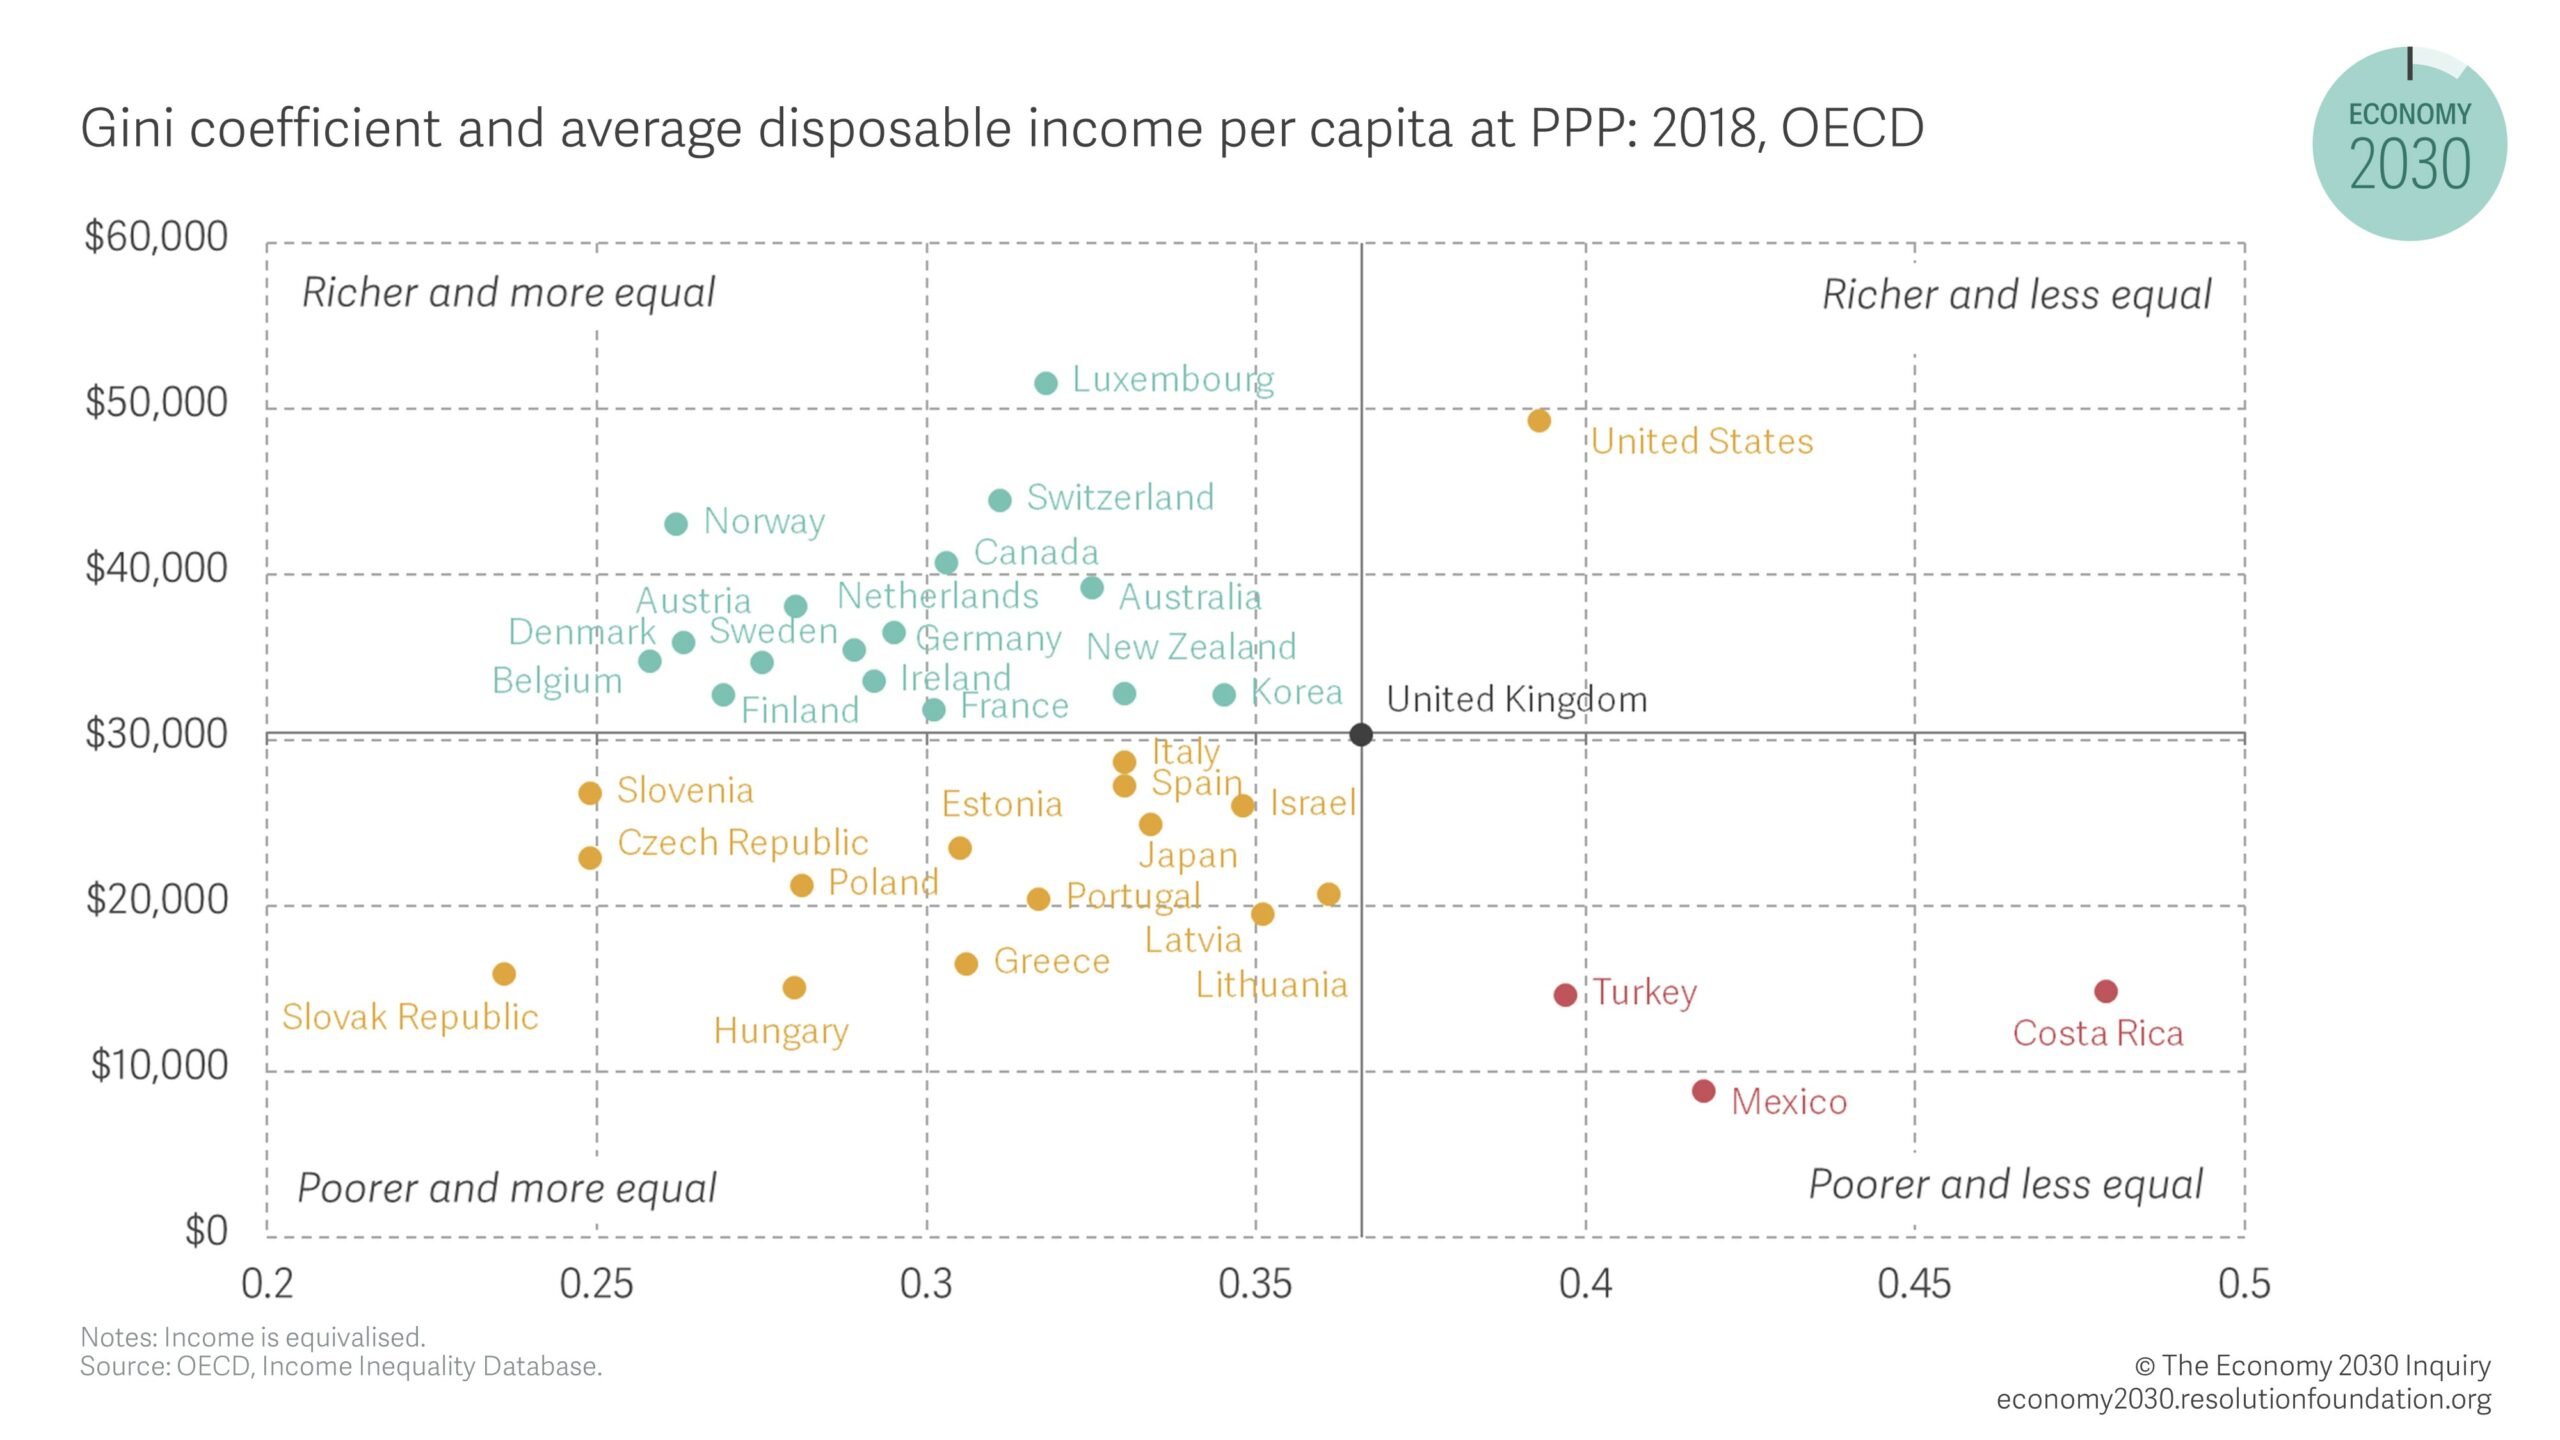 Chart showing Gini coefficient and average disposable income per capita at PPP: 2018, OECD